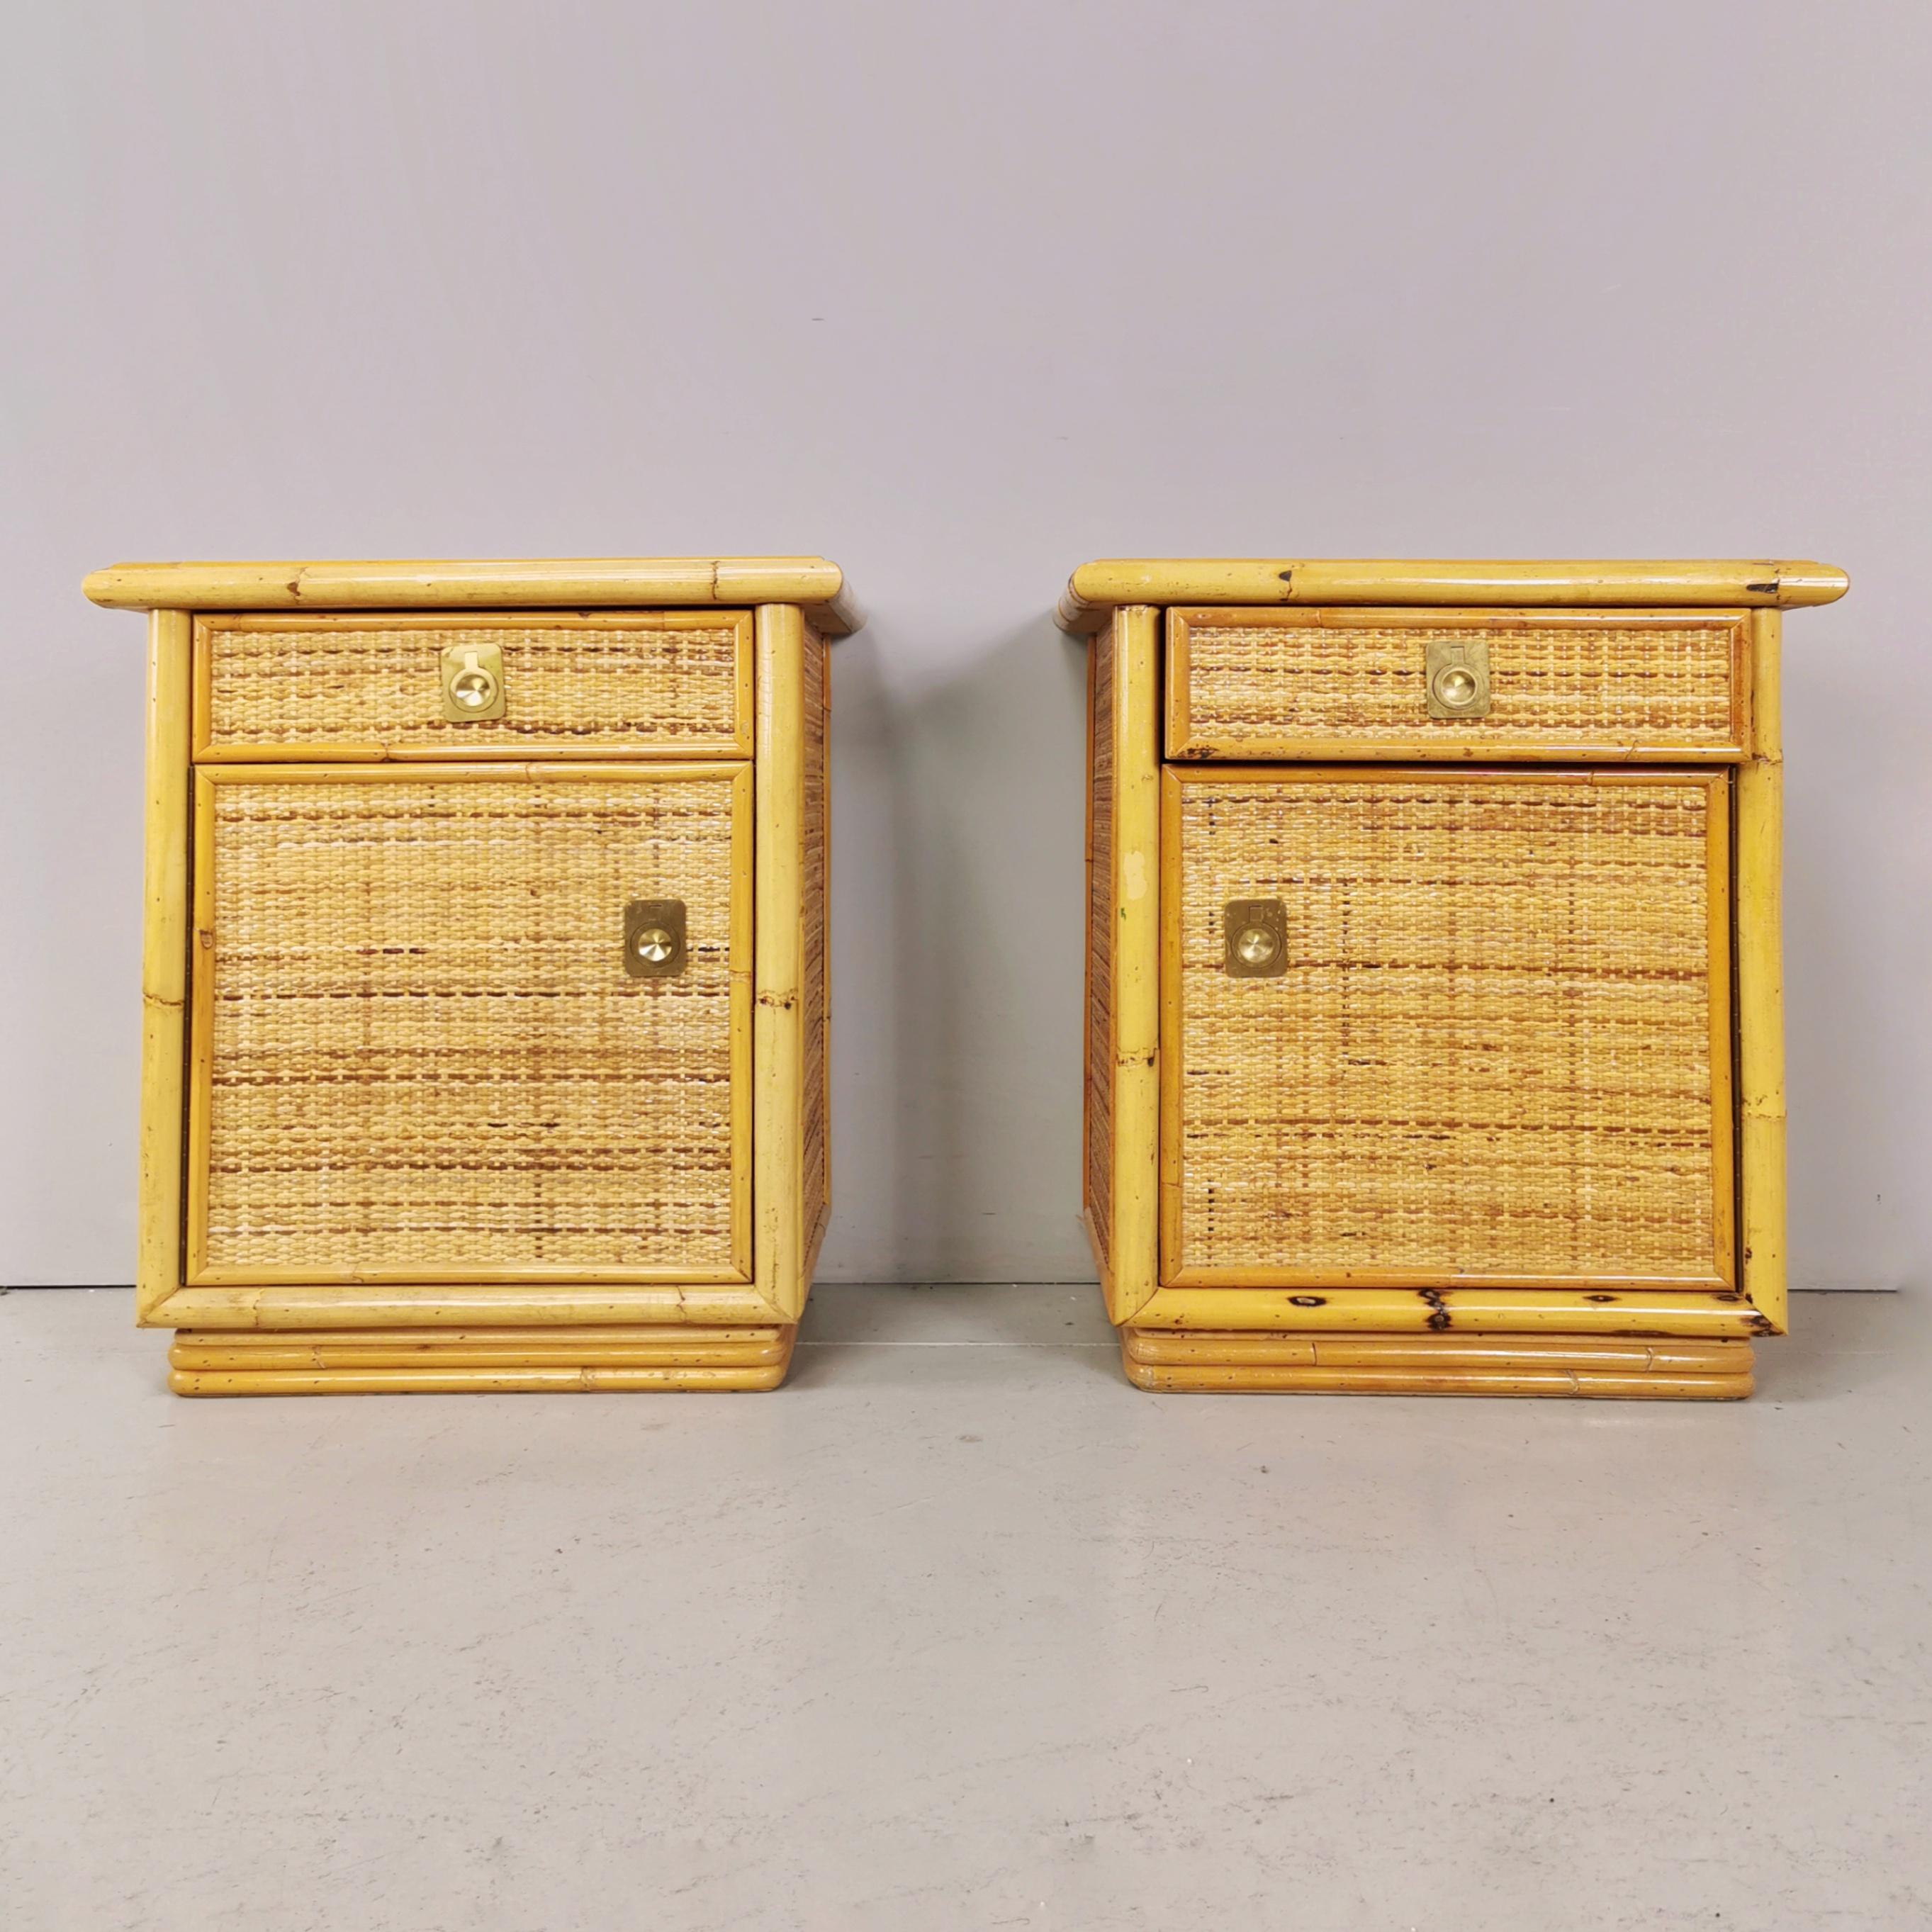 Pair of vintage 1970s bamboo wicker/rattan nightstands with brass handles.
The nightstands are in excellent condition with no particular defects or breaks.
The structure is made of mambu and the surfaces are the minimal or rattan in perfect